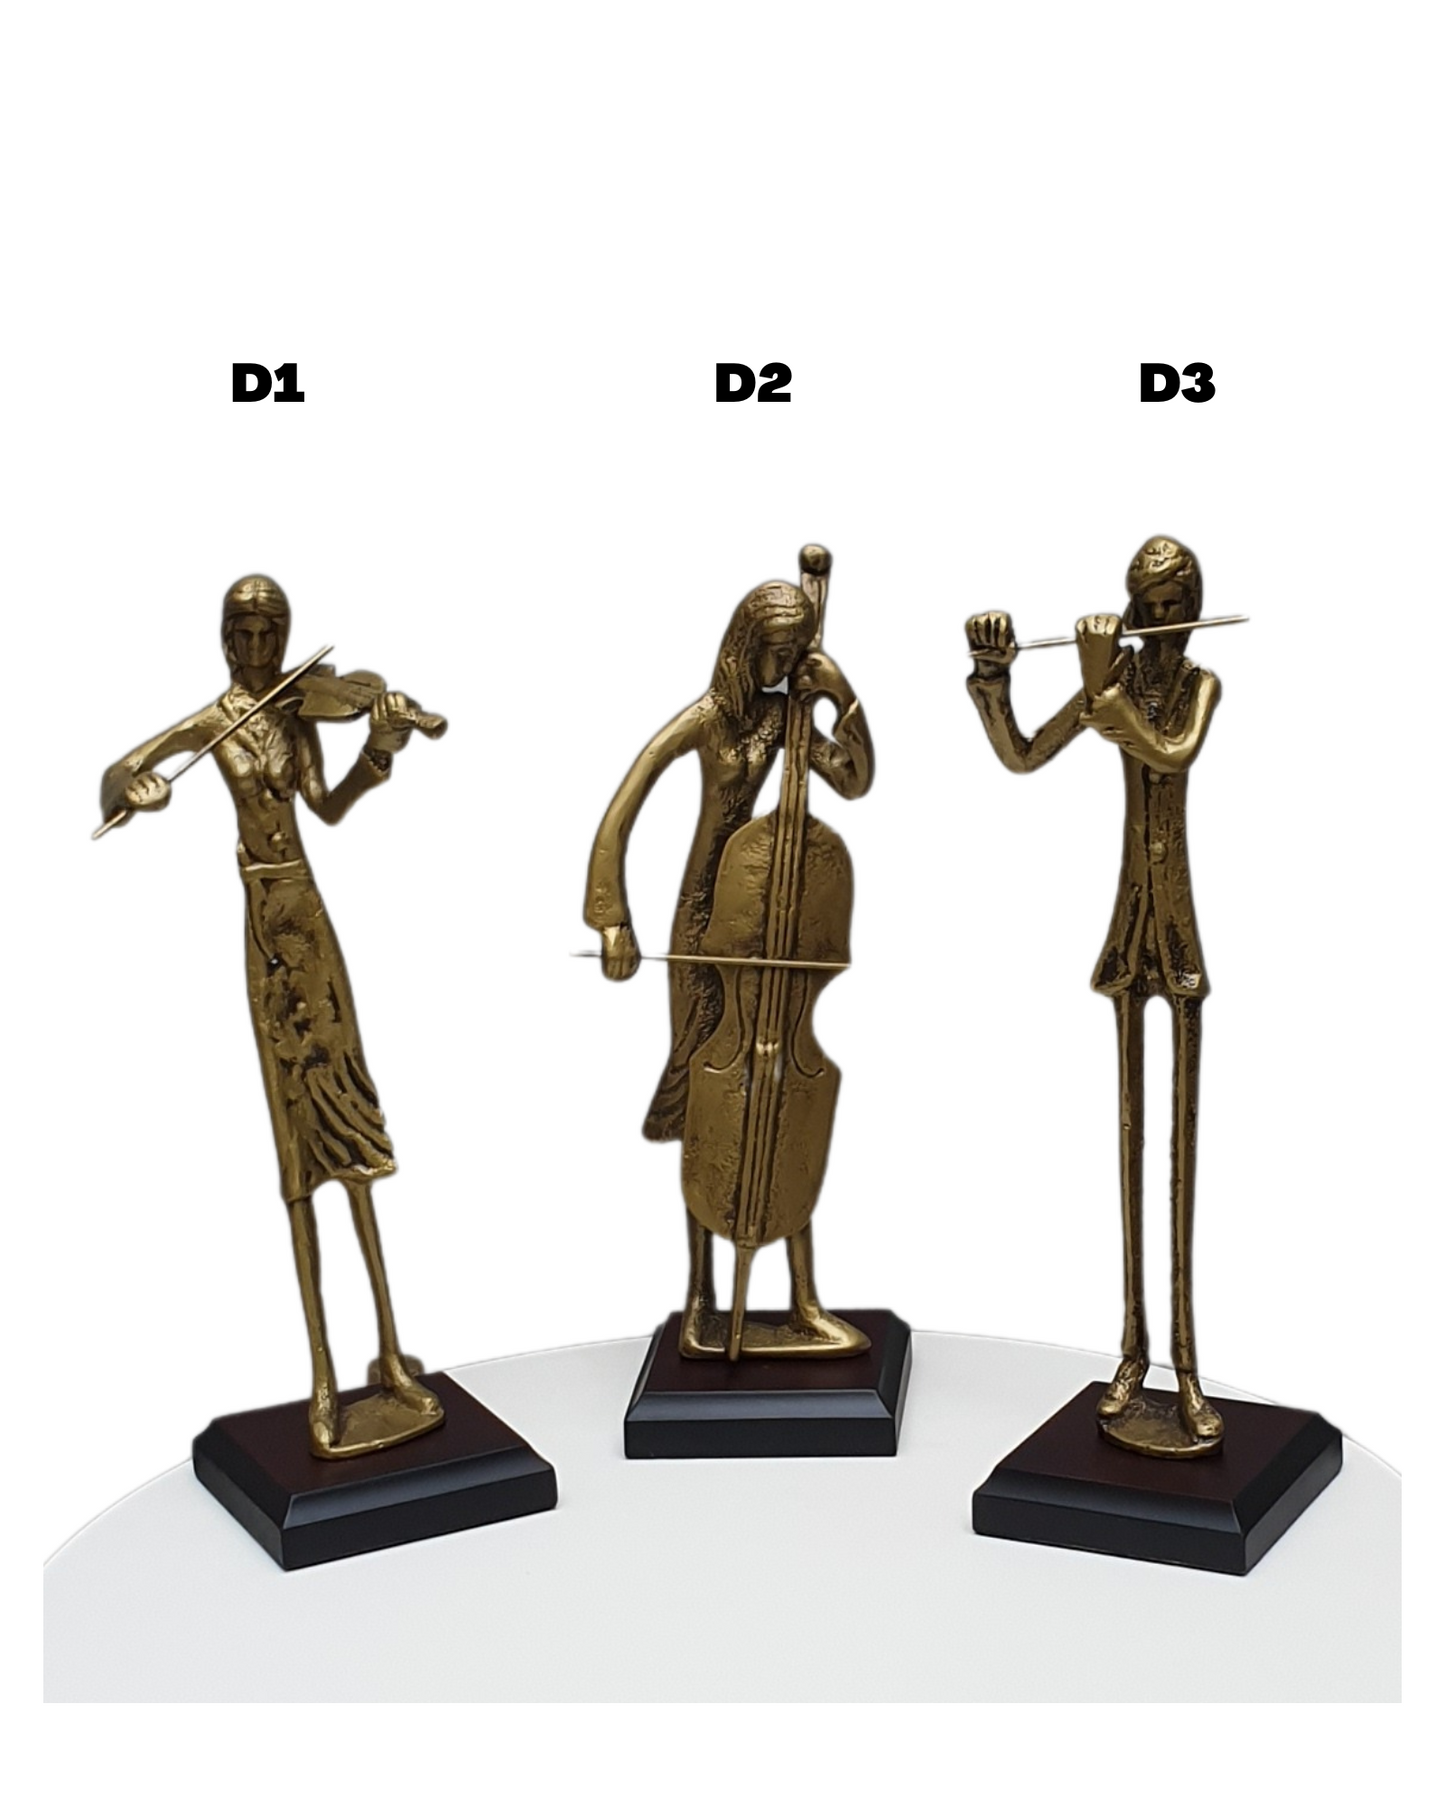 Metal Standing Musician Sculptures   - Available in 3 Designs